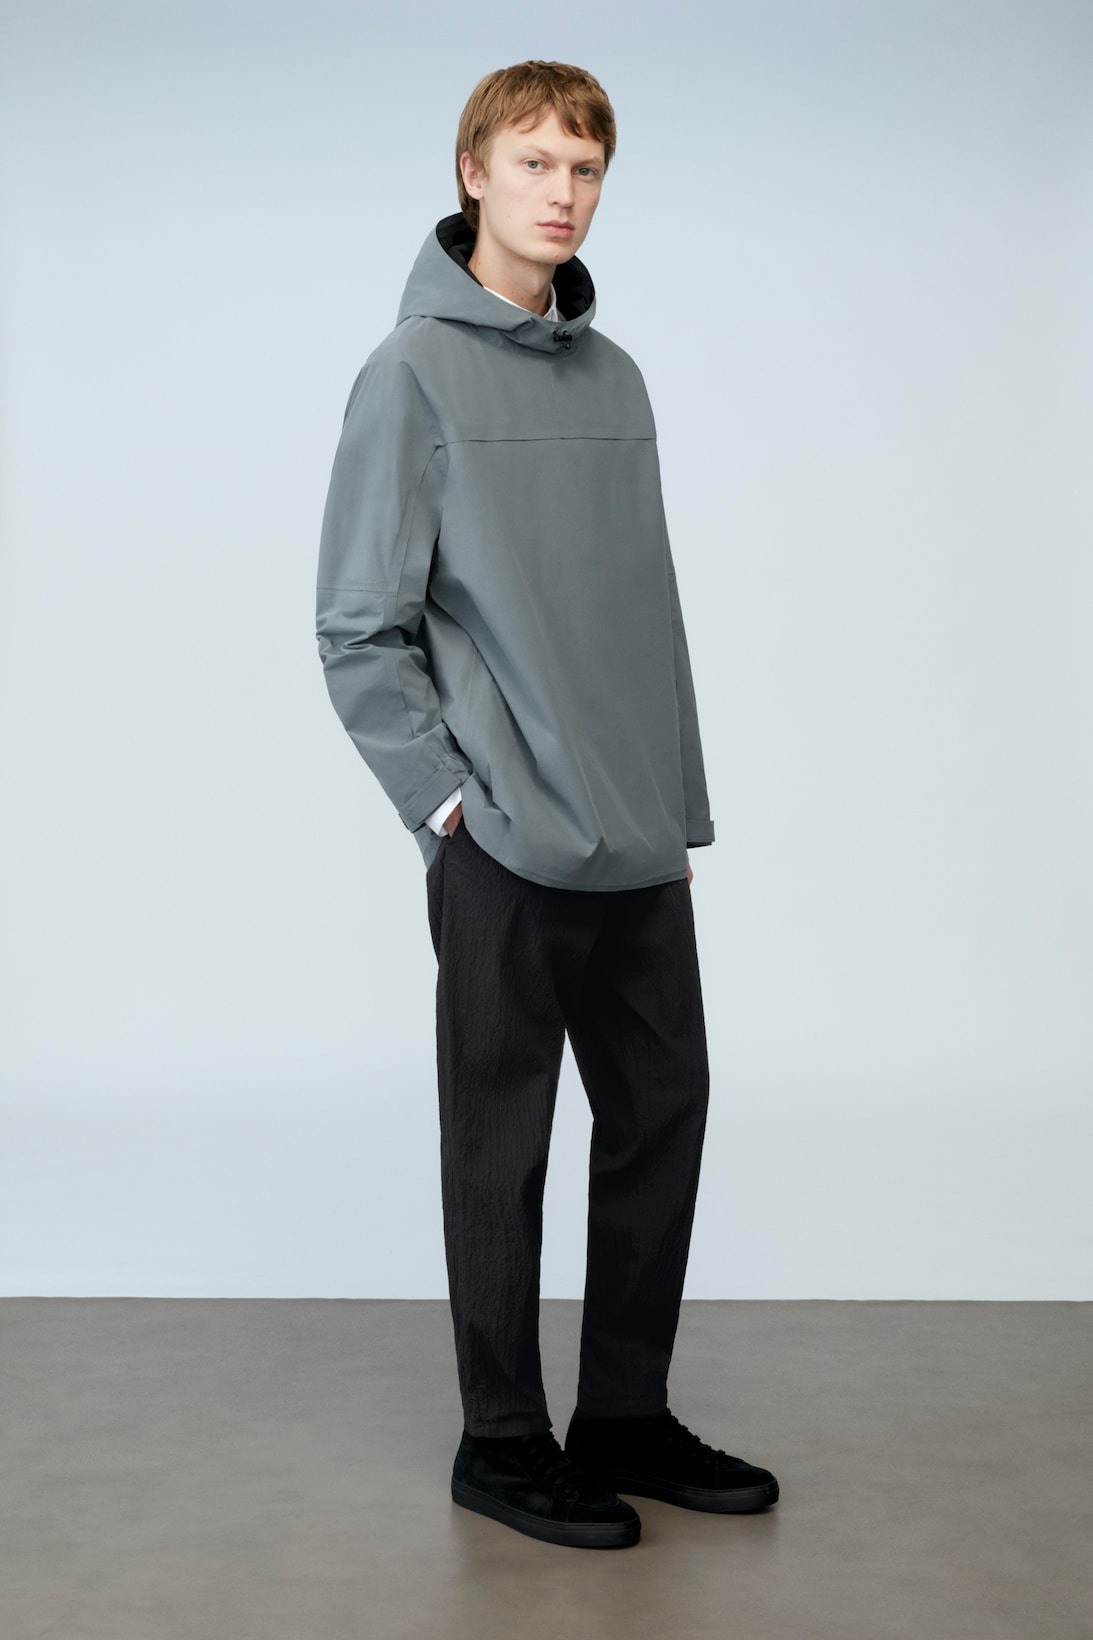 cos spring menswear summer collection lookbook gray hoodie jacket outerwear pants black shoes